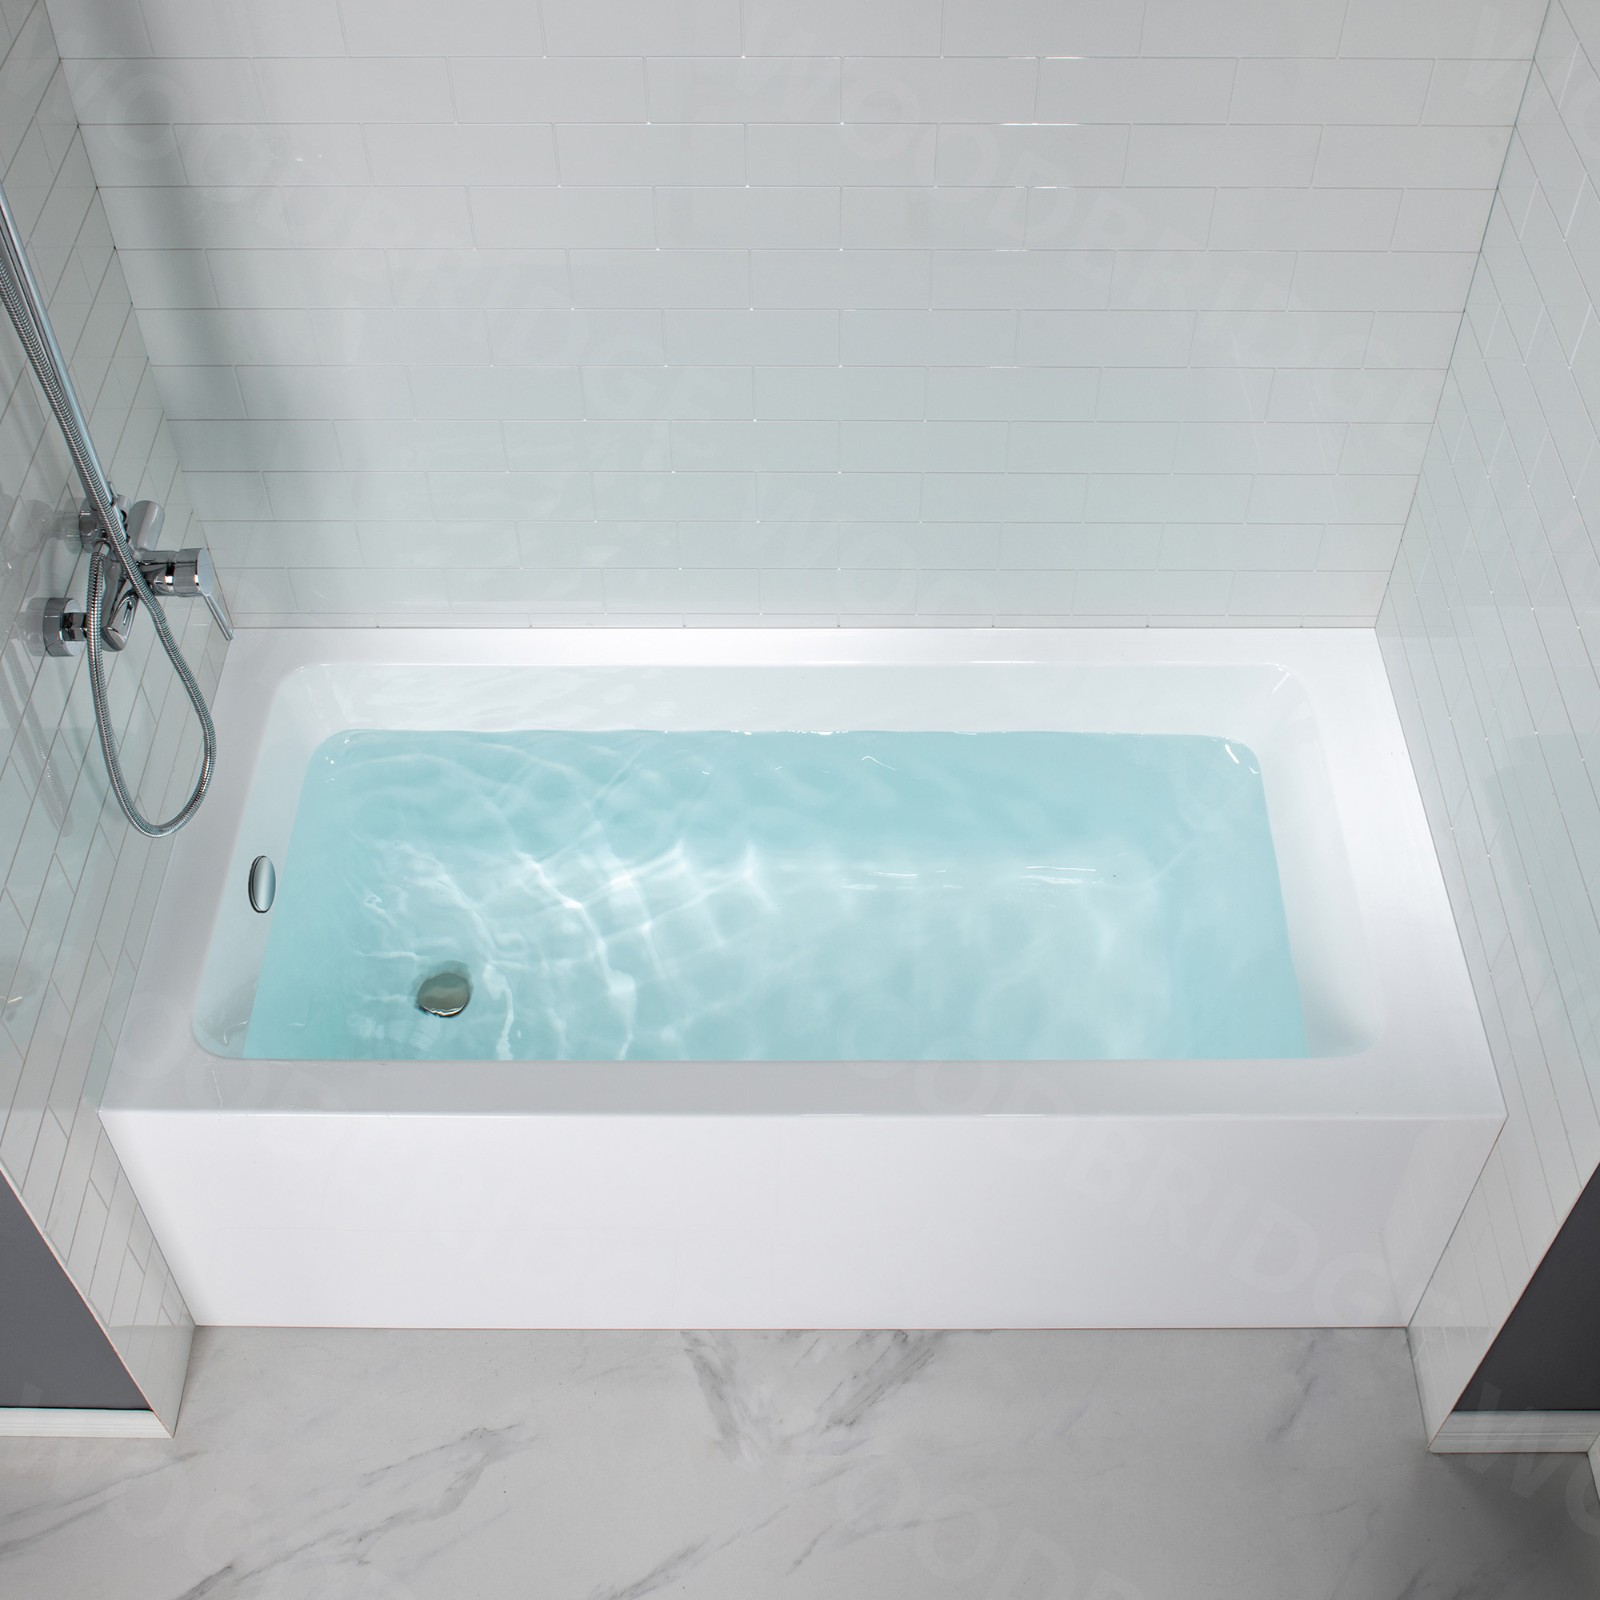  WOODBRIDGE 60-Inch Contemporary Alcove Acrylic Bathtub with Left Hand Drain and Overflow Holes, White_9218